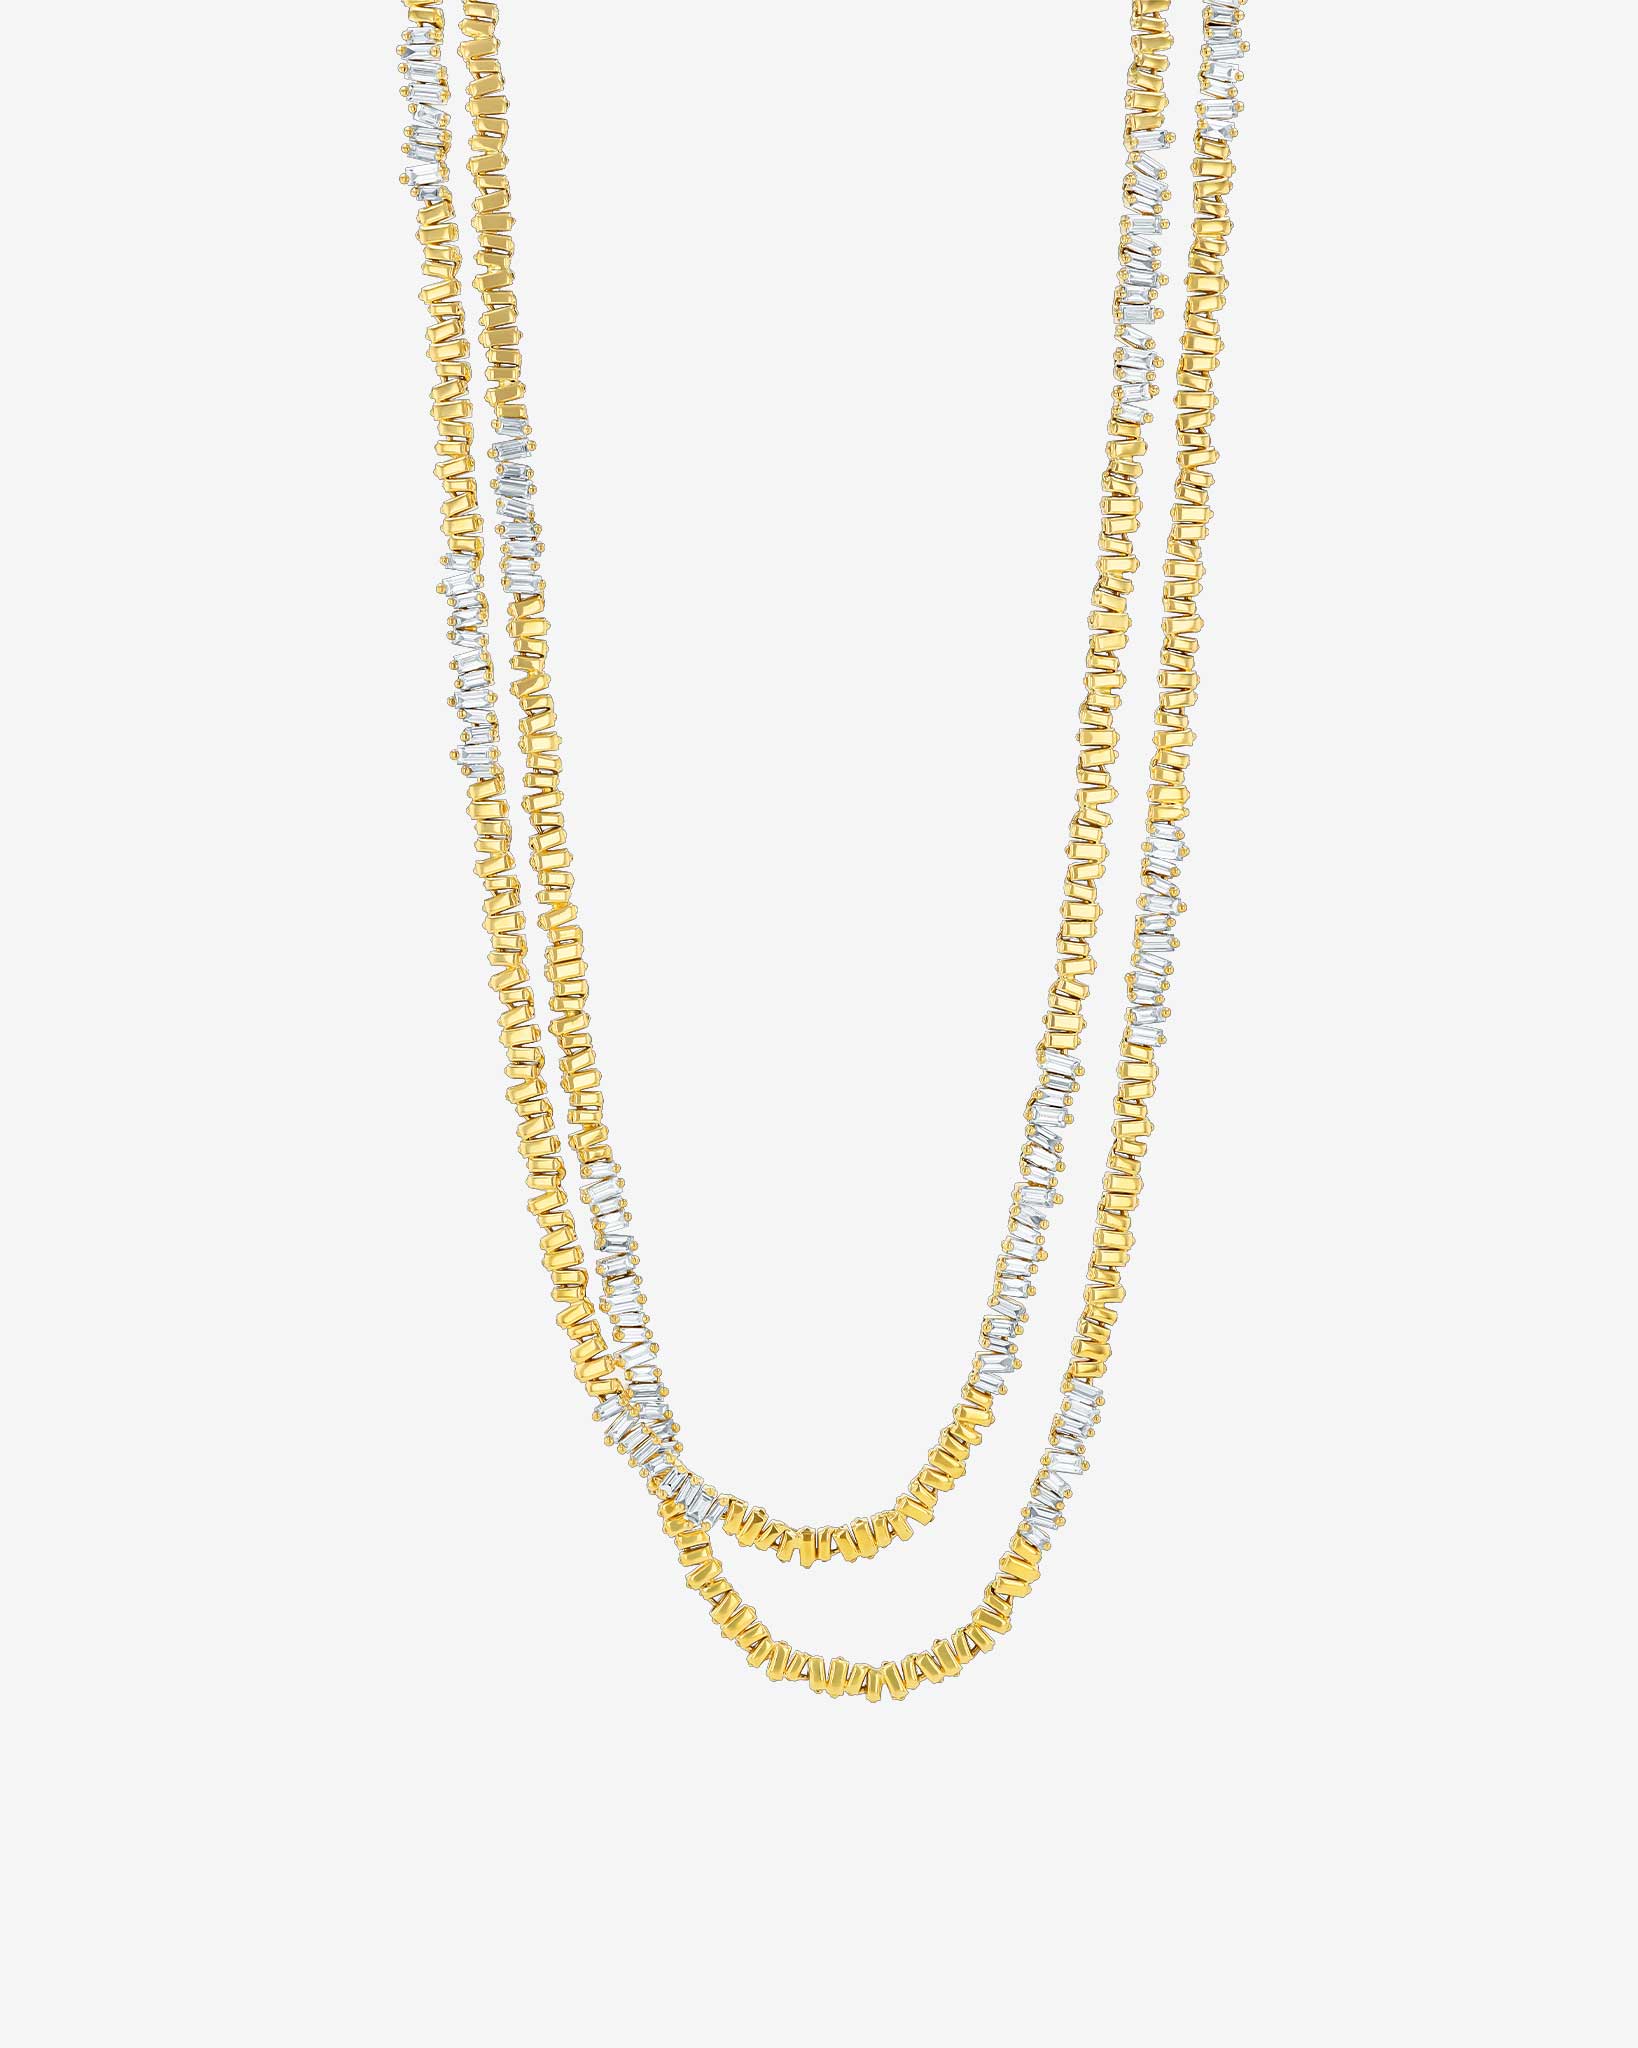 Suzanne Kalan Golden Diamond 60" Inch Baguette Tennis Necklace in 18k yellow gold